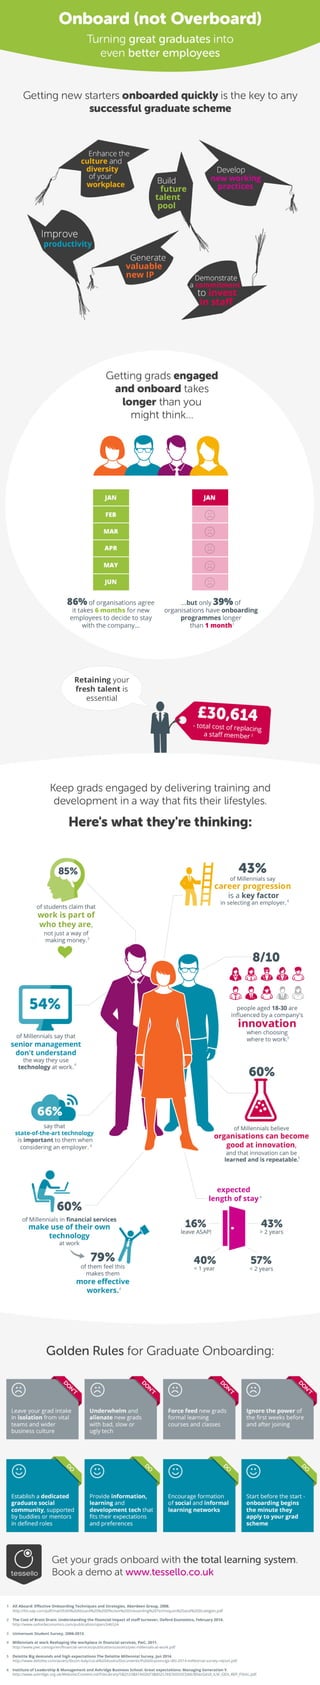 Infographic: Onboard (not Overboard) The smart way to embed new graduates in your business